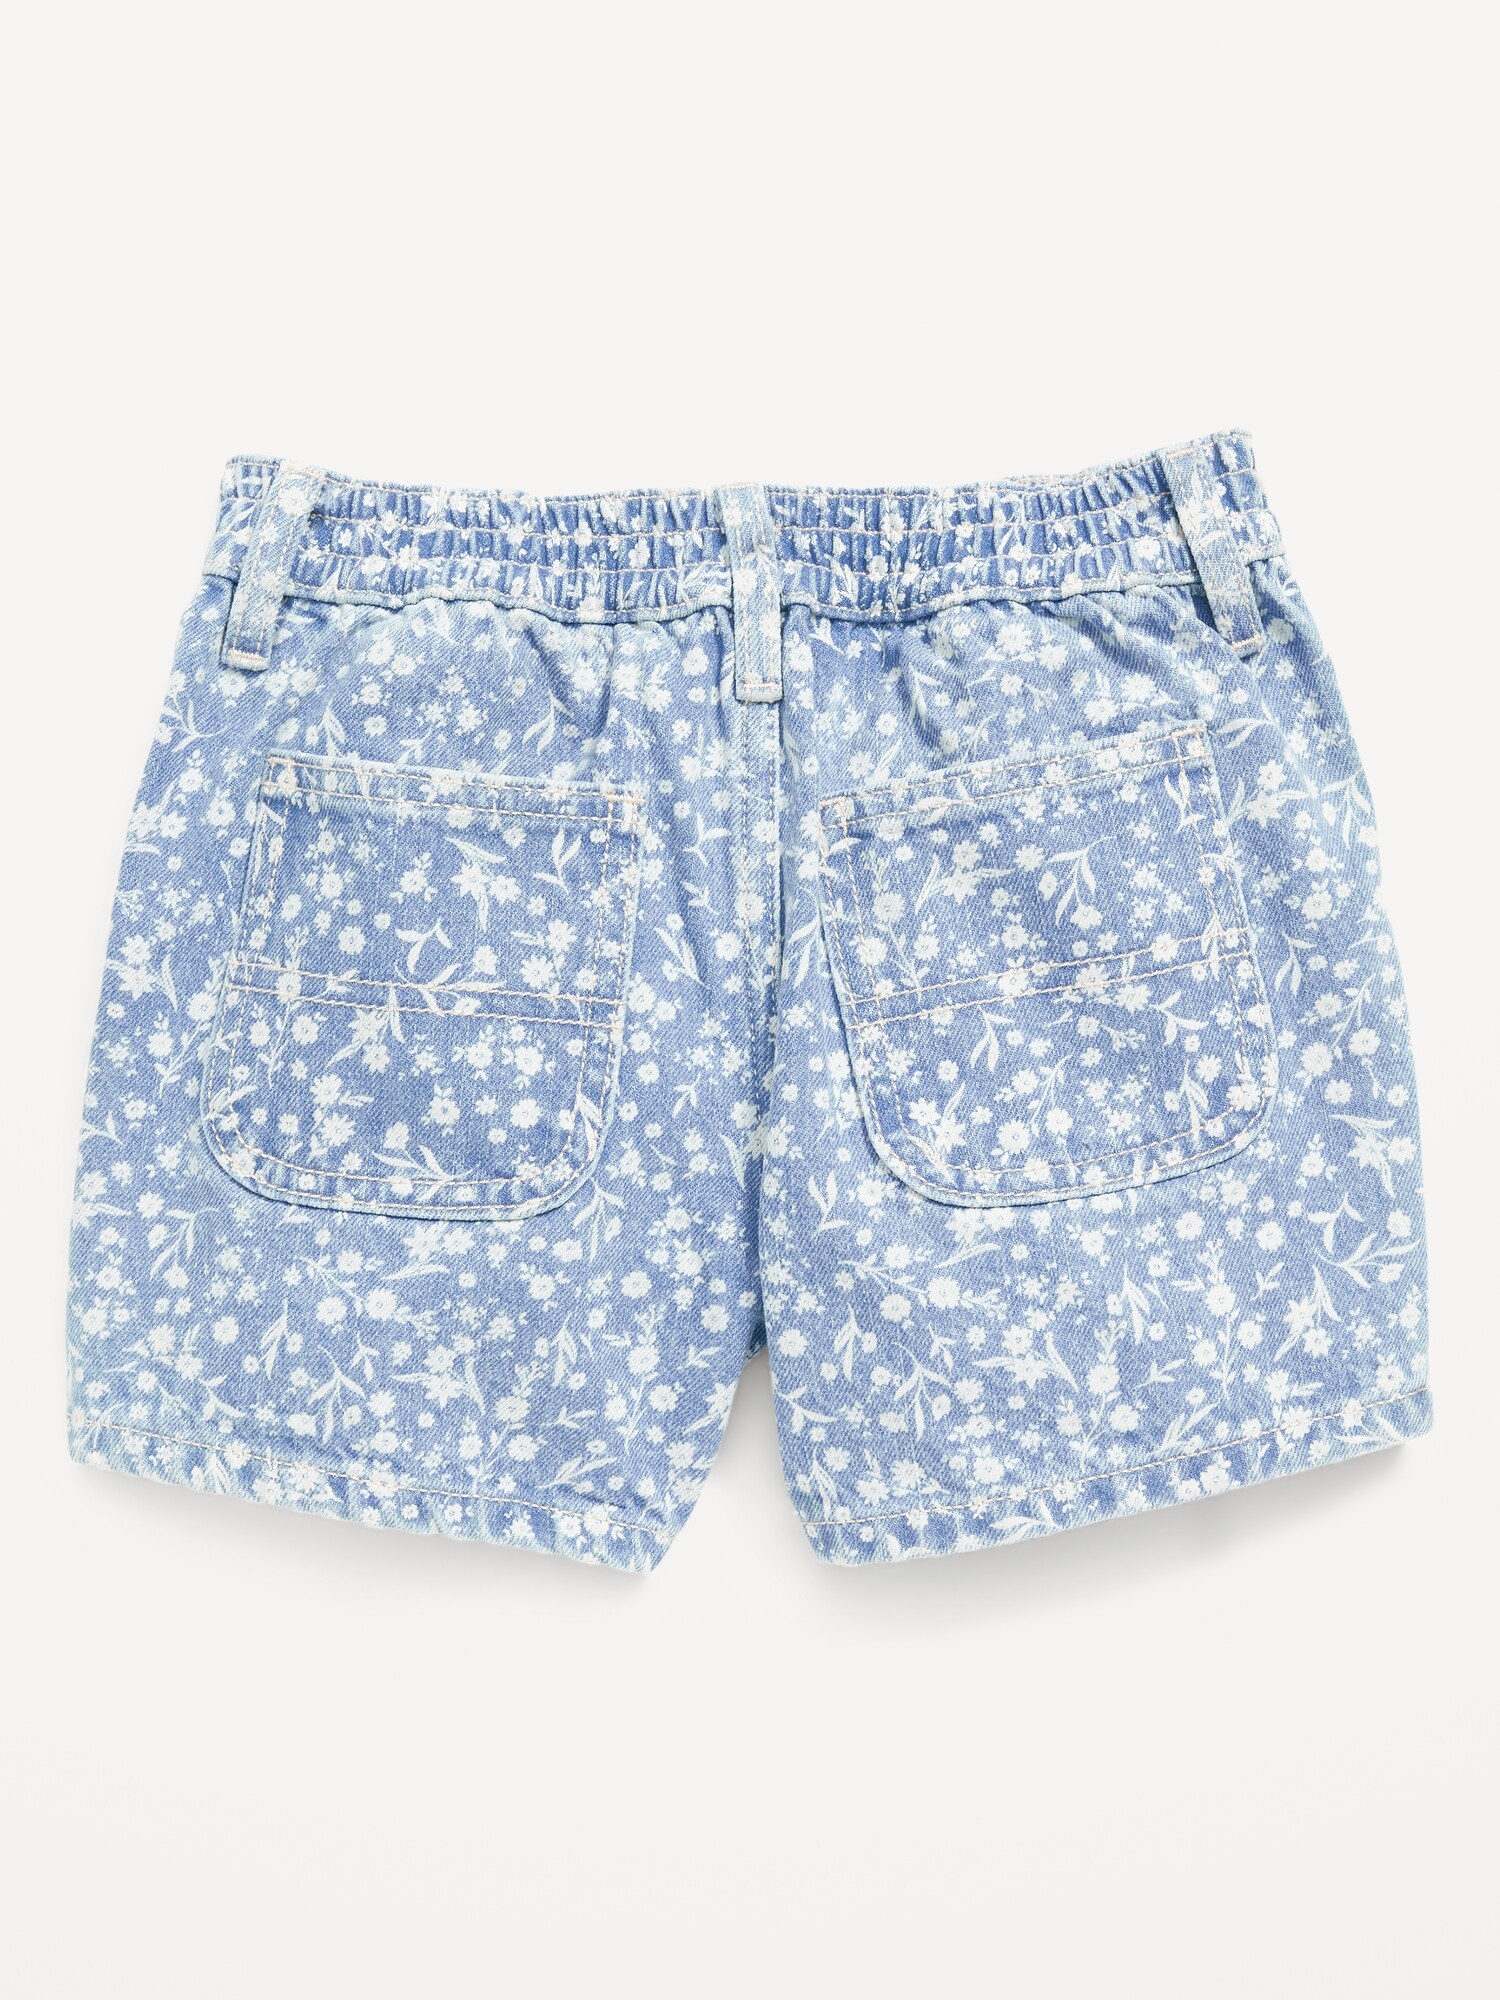 Elasticized Waist Printed Workwear Non-Stretch Jean Shorts for Girls ...